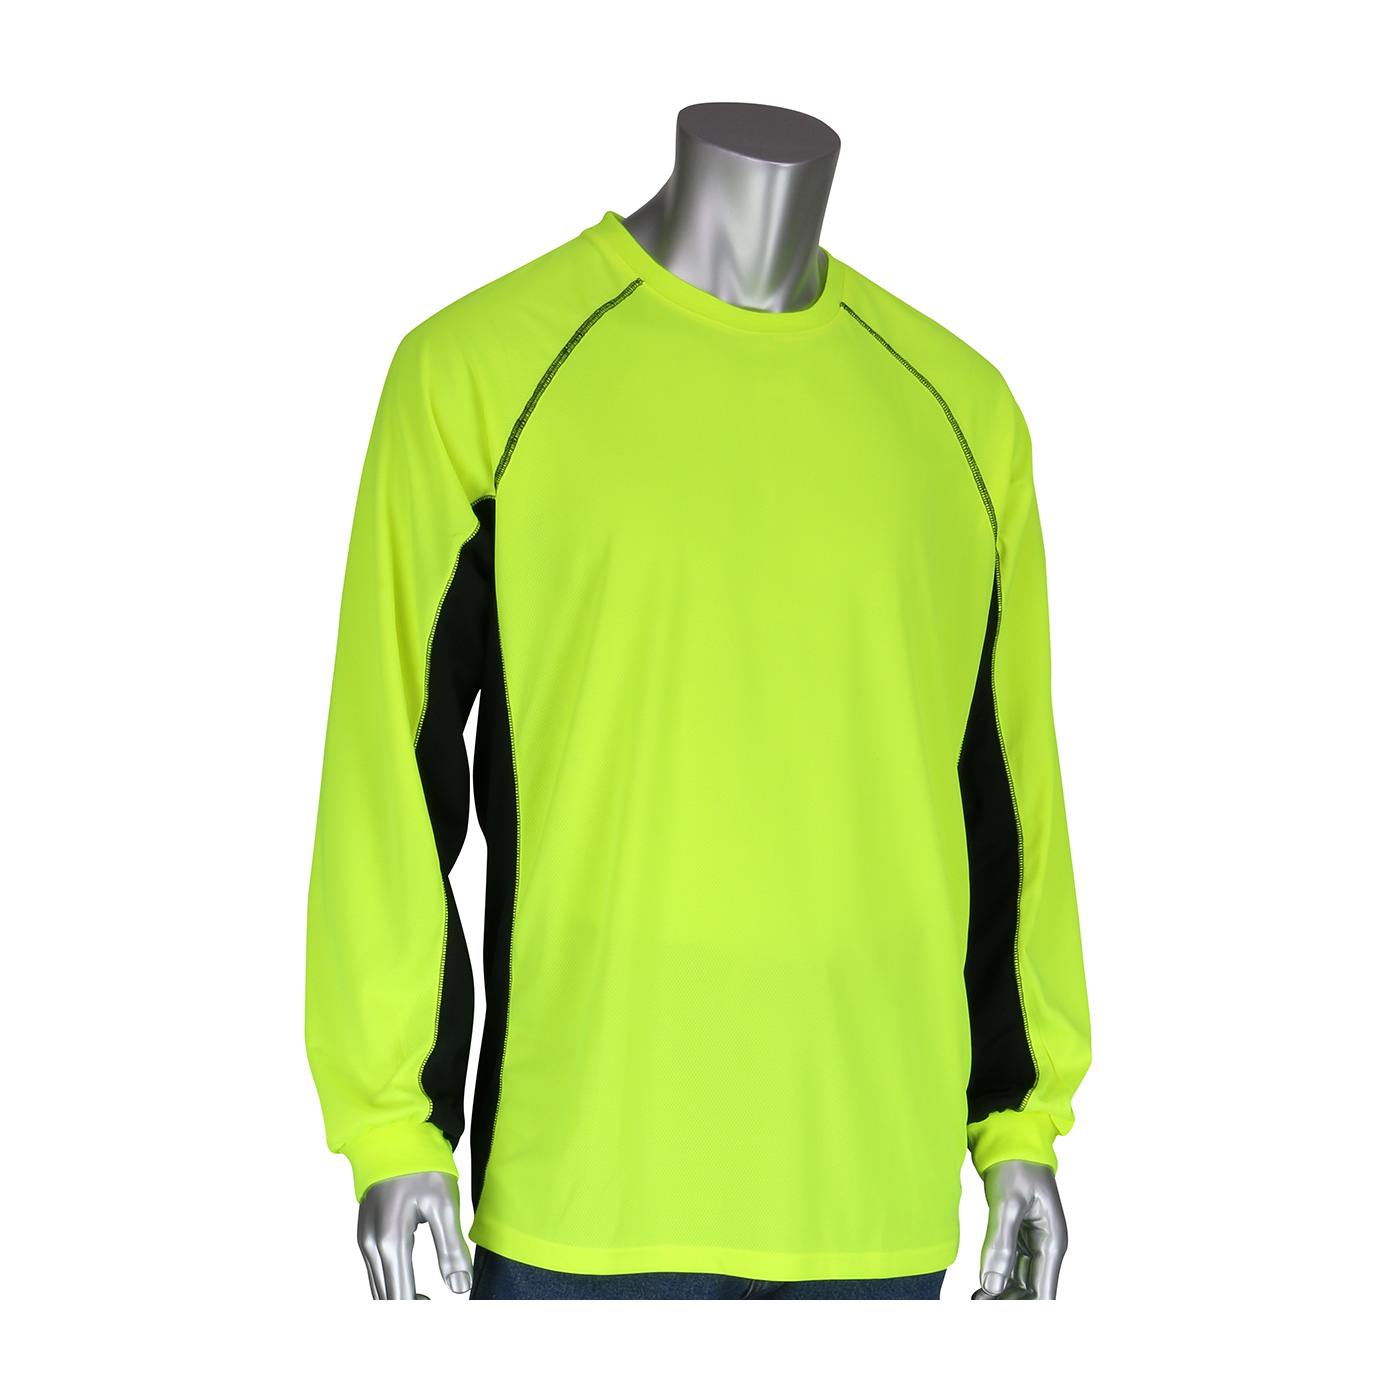 PIP® Non-ANSI Long Sleeve T-Shirt with 50+ UPF Sun Protection, Insect Repellent Treatment and Black Trim #310-1150B